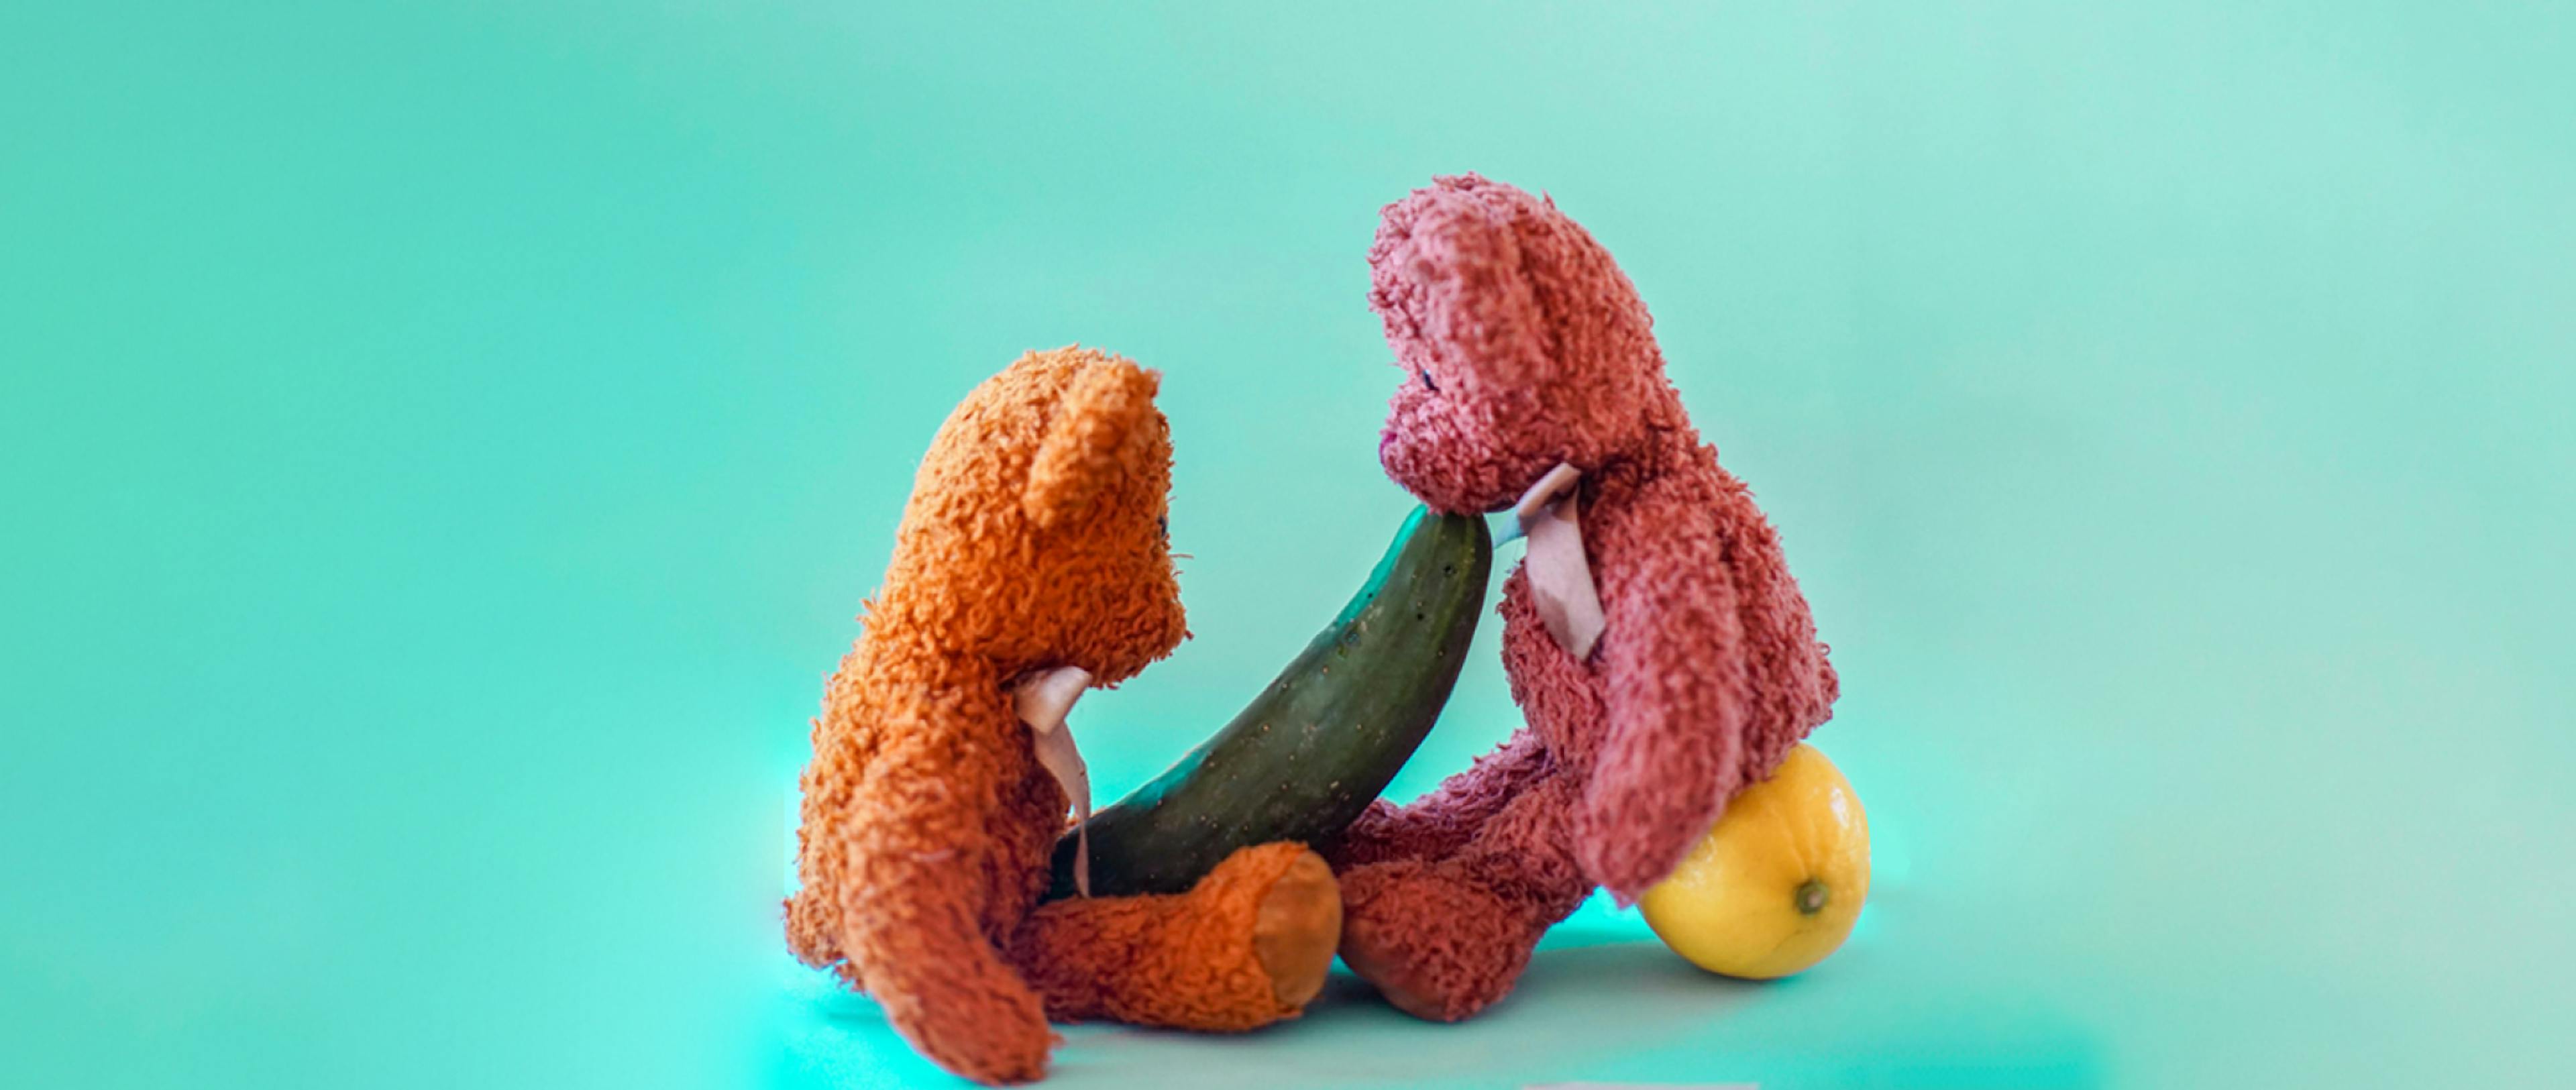 A pink and orange teddy bear with a cucumber between them meant to represent oral sex